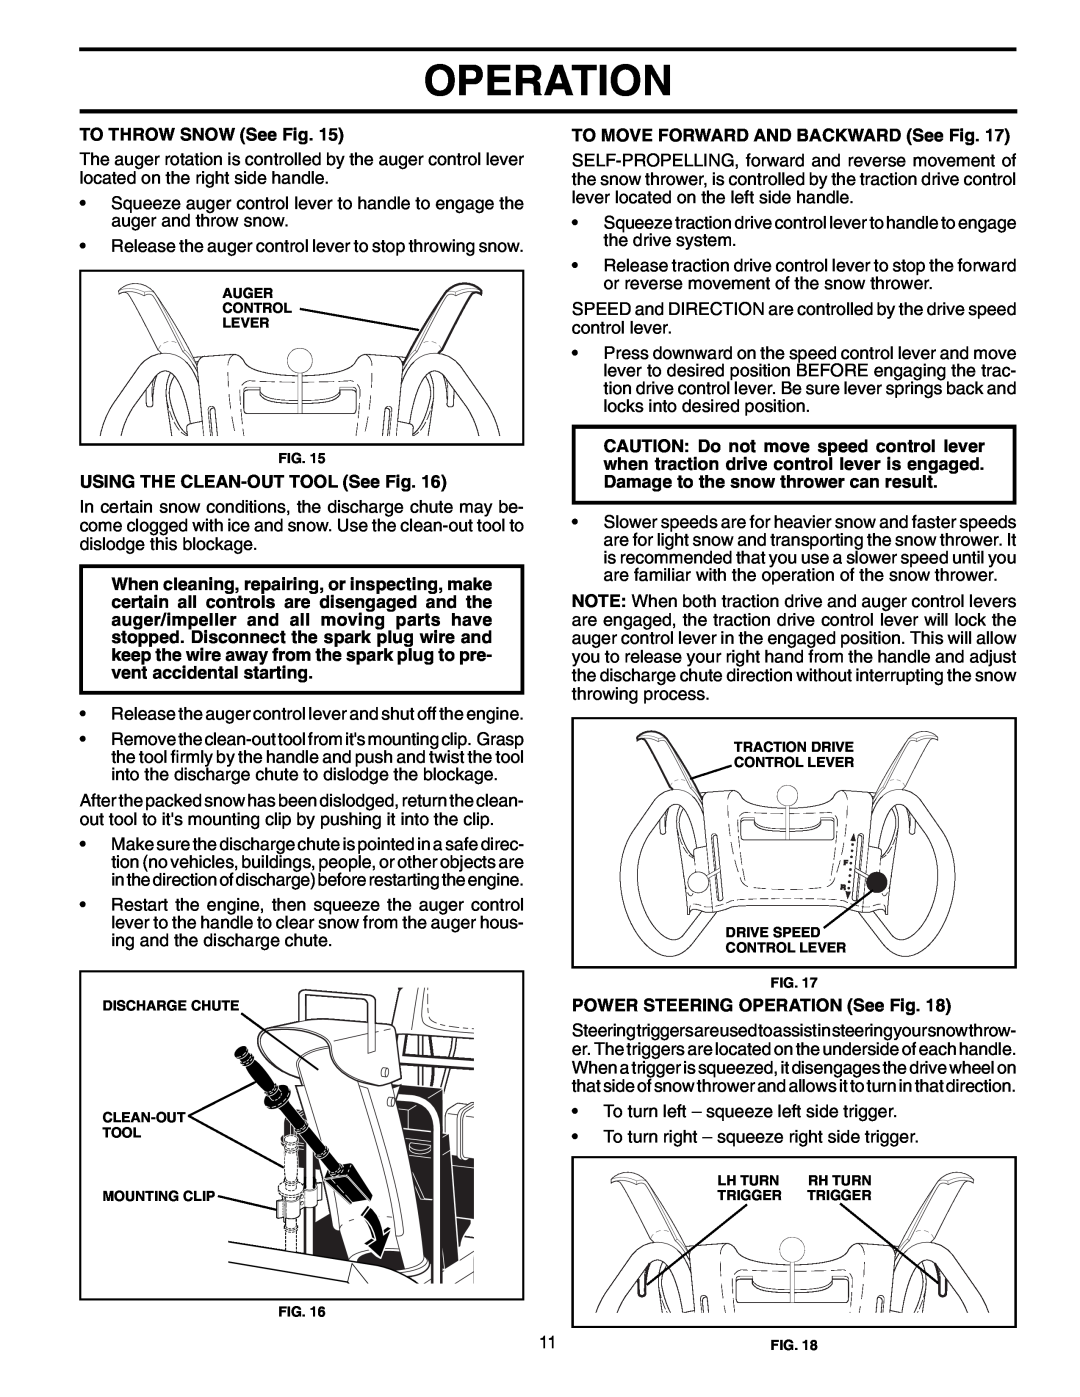 Yard Machines 961940001 owner manual Operation, TO THROW SNOW See Fig, USING THE CLEAN-OUTTOOL See Fig 